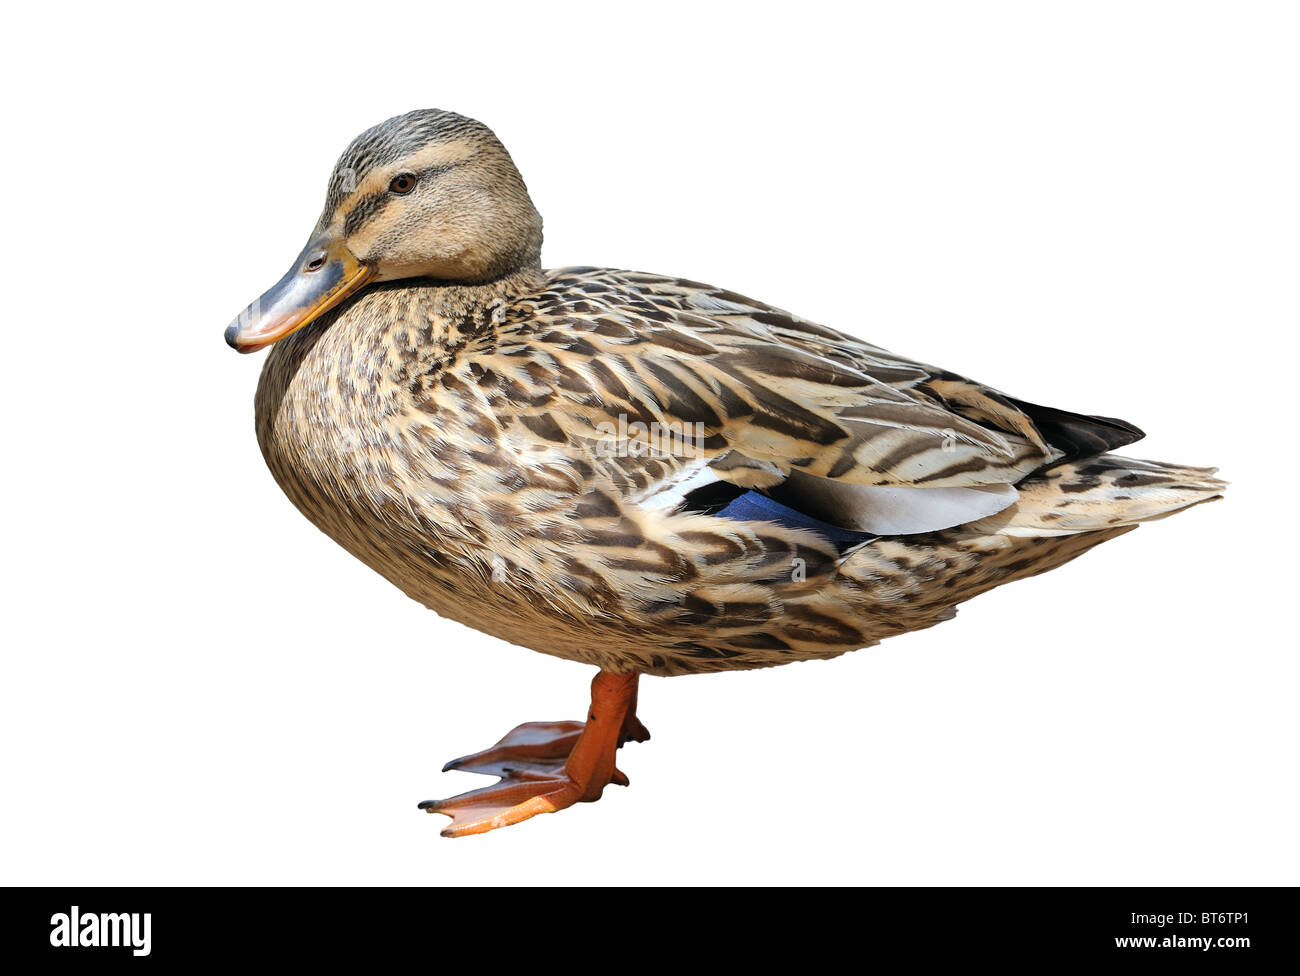 Duck at the zoo, isolated Stock Photo